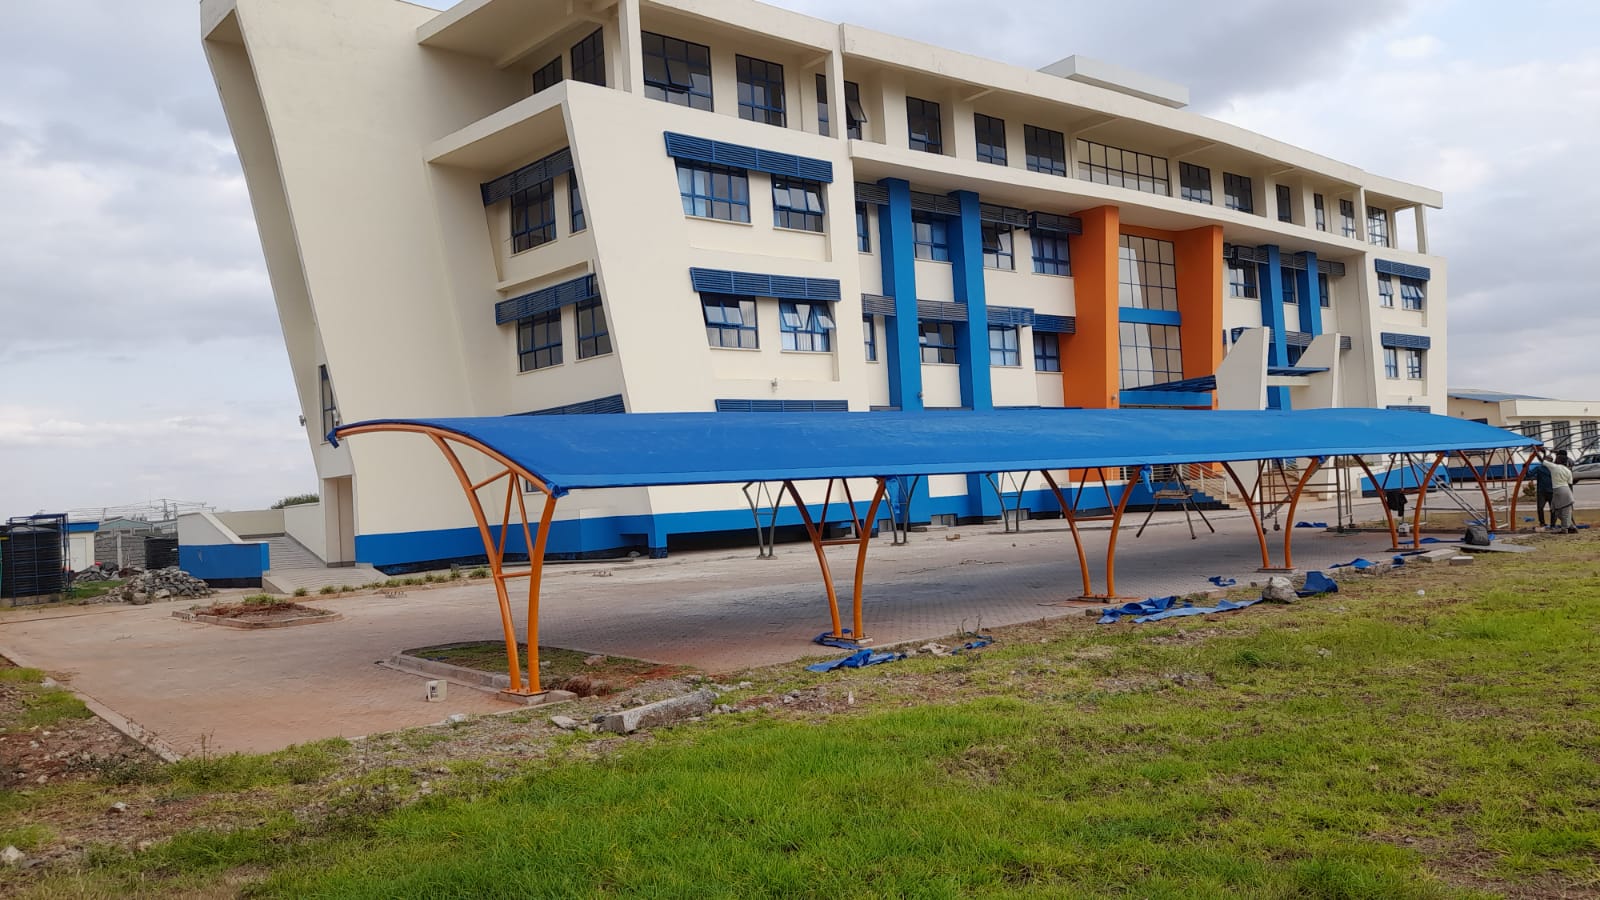 Car Port-Parking Shade for Commercial and Residential Areas-Cantilever Canopy-Curved Car Shade-Waterproof Shade-Sun shade-Vehicle parking cover-Garage Shade-Car Park Tent for Schools, Offices, Churches, Airports, Factories, Companies, University, Hospitals, Colleges, Government Institutions, Military and Arm Bases